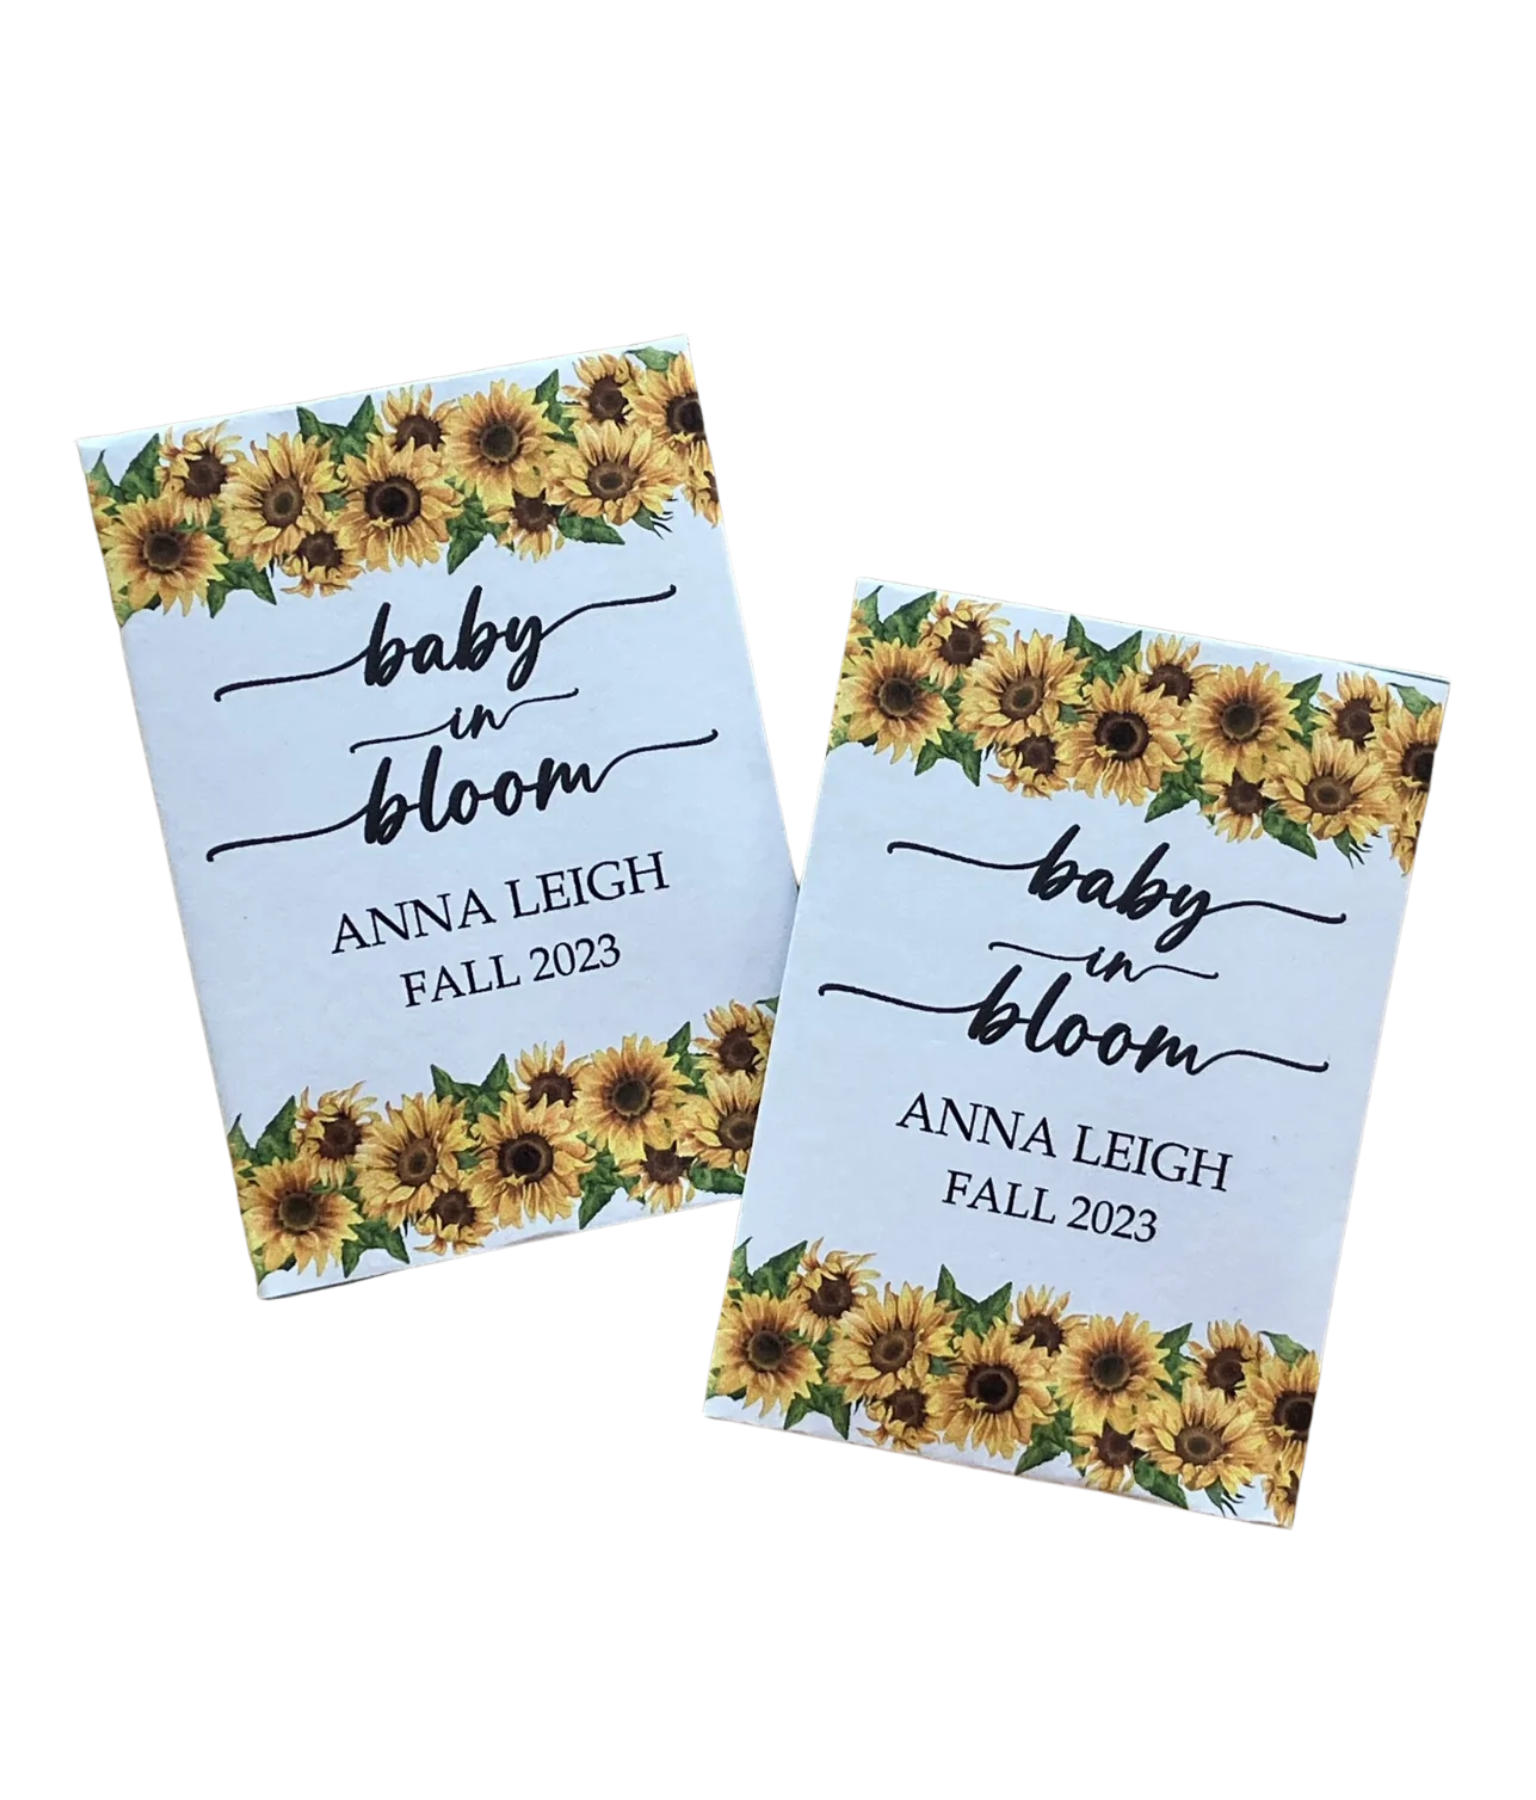 Shower Seed Packets, Baby Shower, Bridal Shower